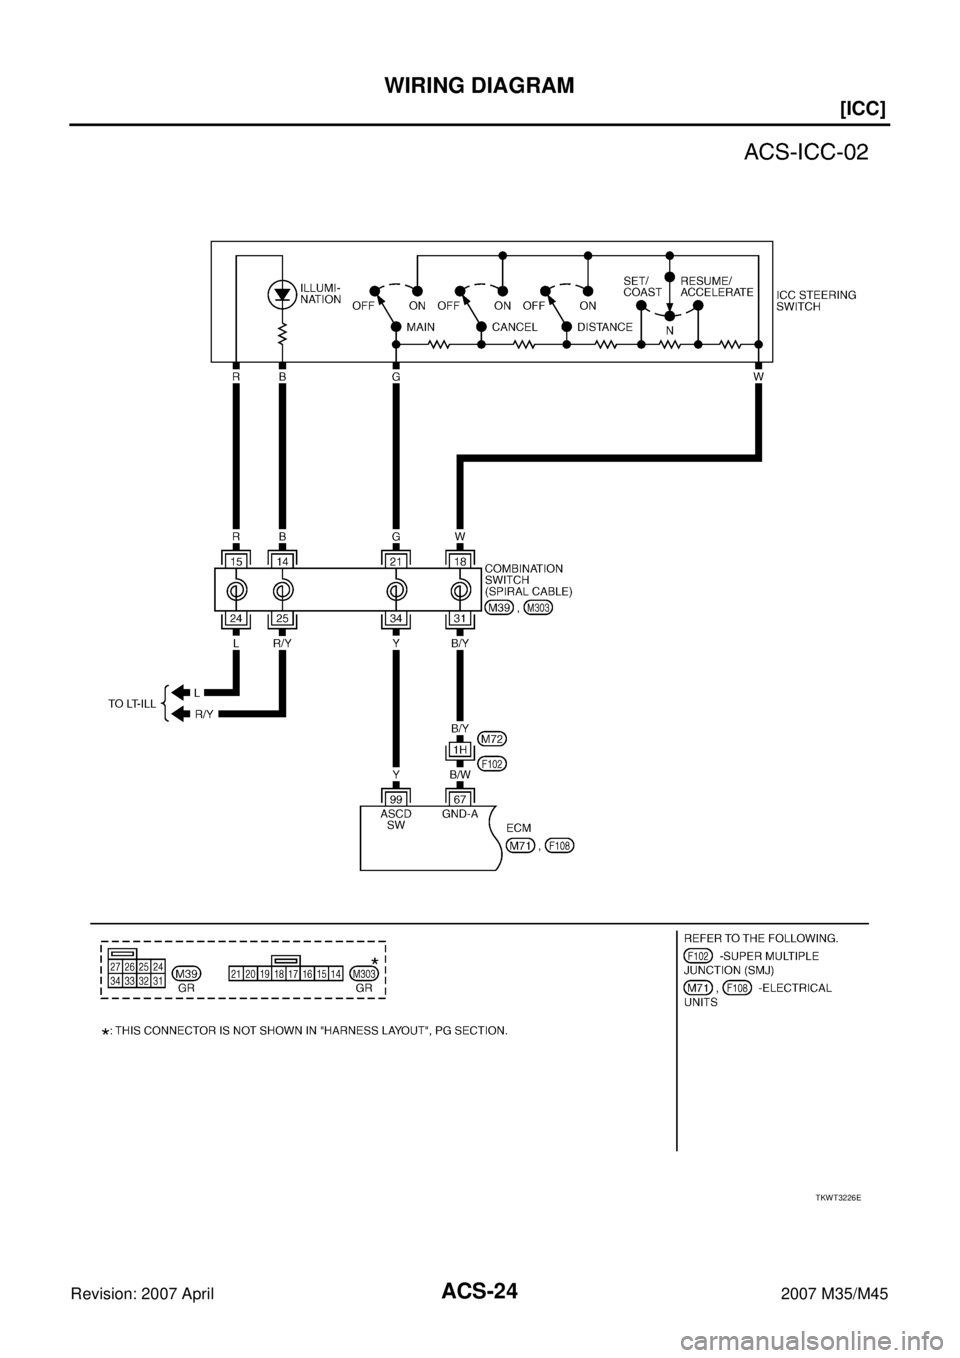 INFINITI M35 2007  Factory Owners Guide ACS-24
[ICC]
WIRING DIAGRAM
Revision: 2007 April2007 M35/M45
TKWT3226E 